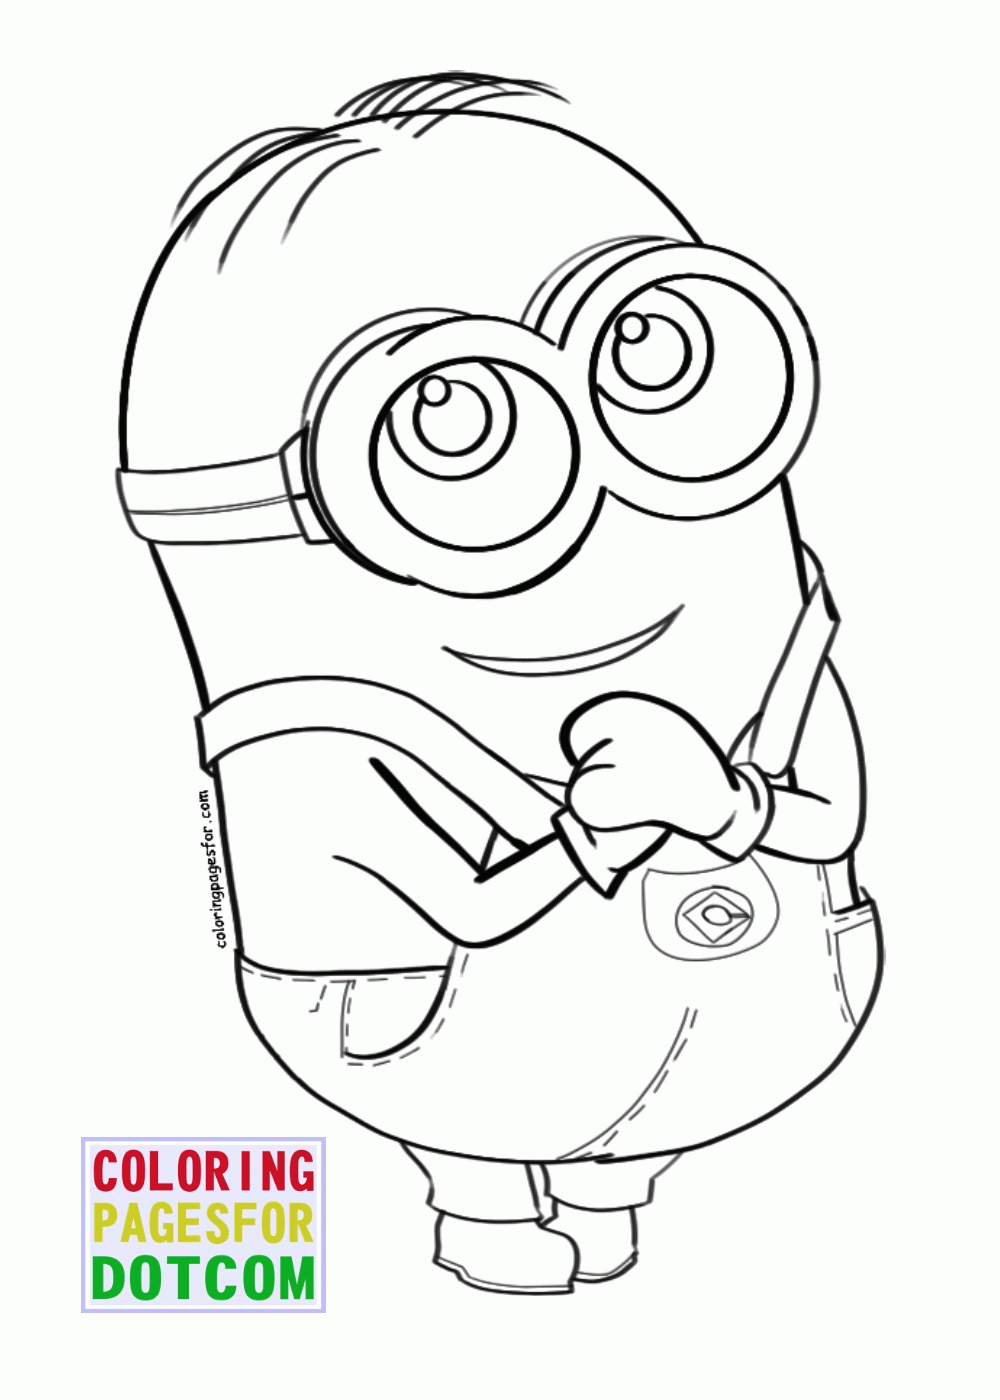 Minions Coloring Pages 3 by blackartist22 on DeviantArt